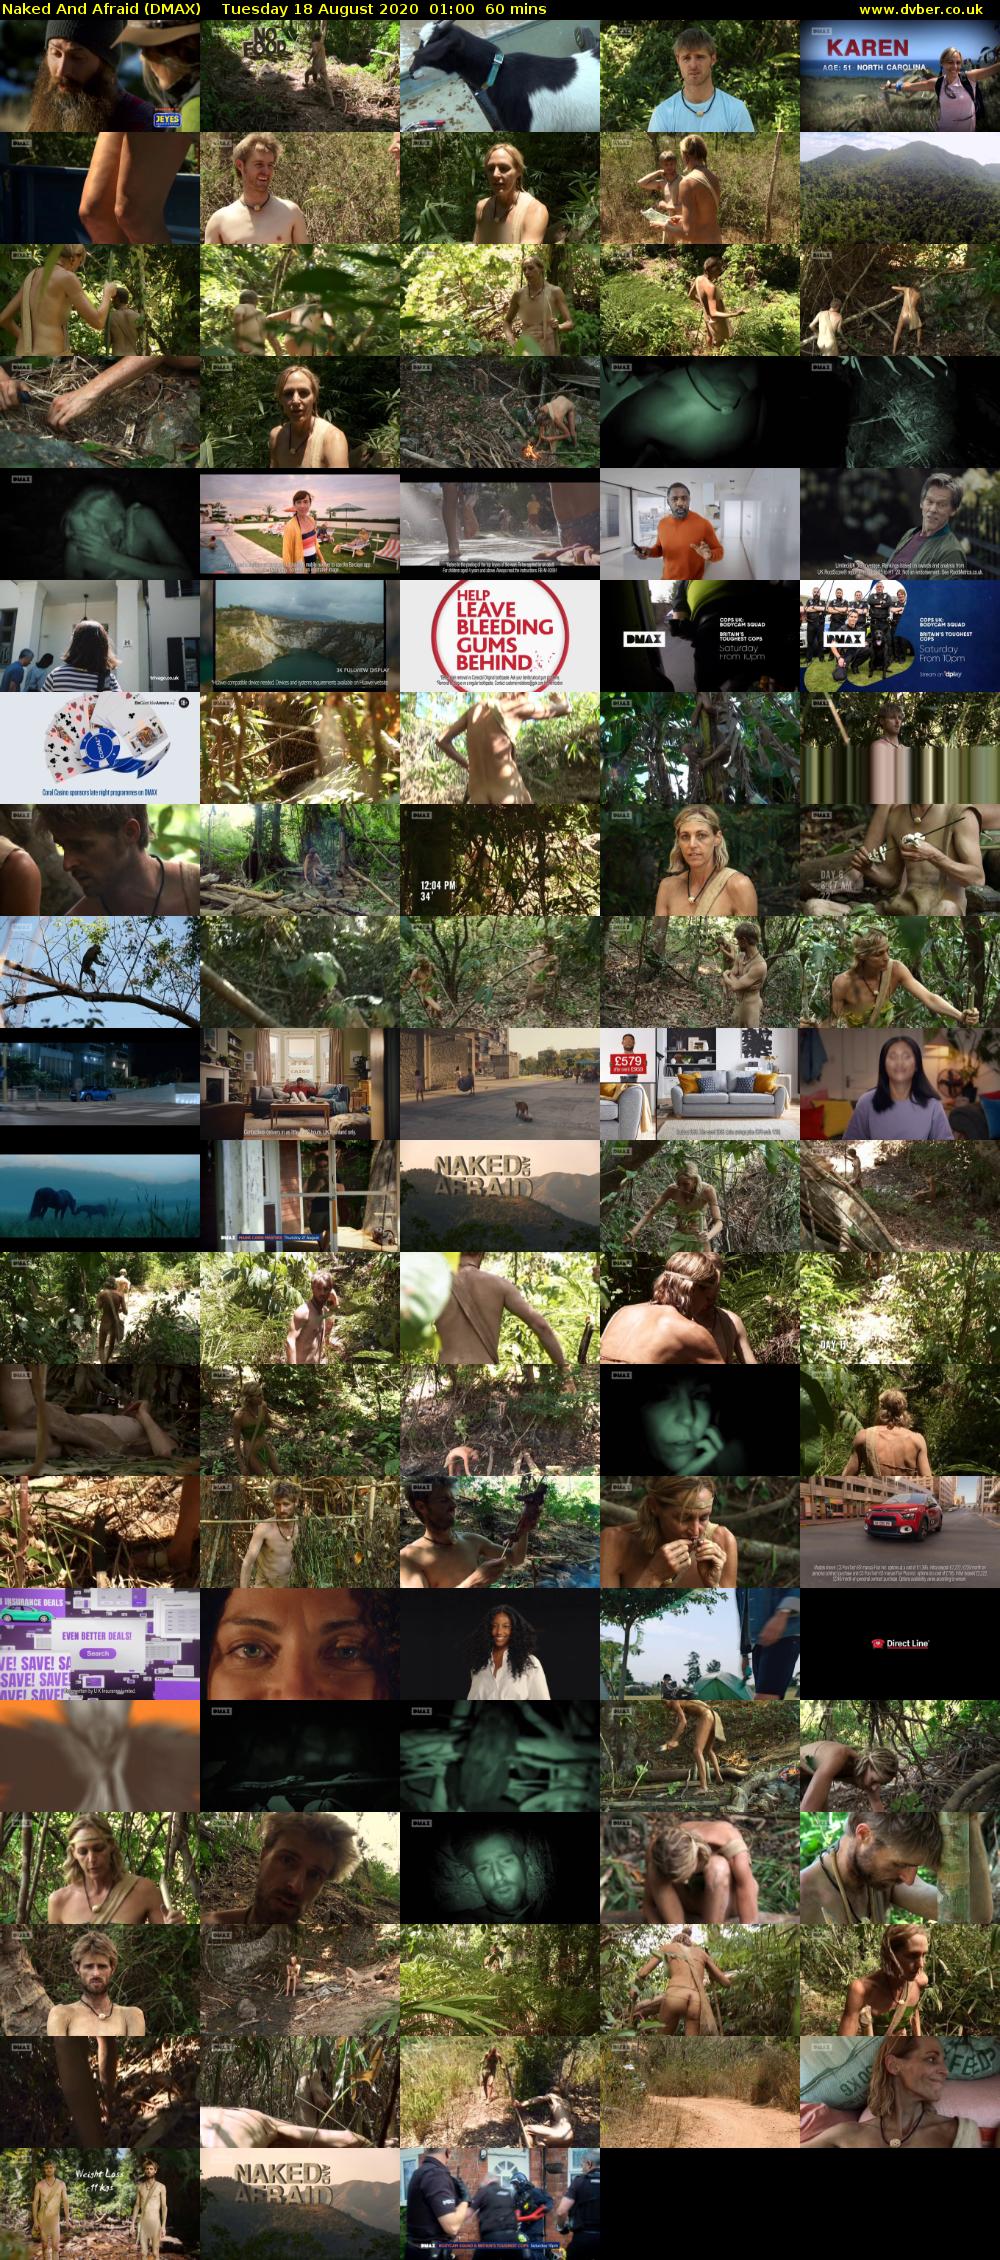 Naked And Afraid (DMAX) Tuesday 18 August 2020 01:00 - 02:00